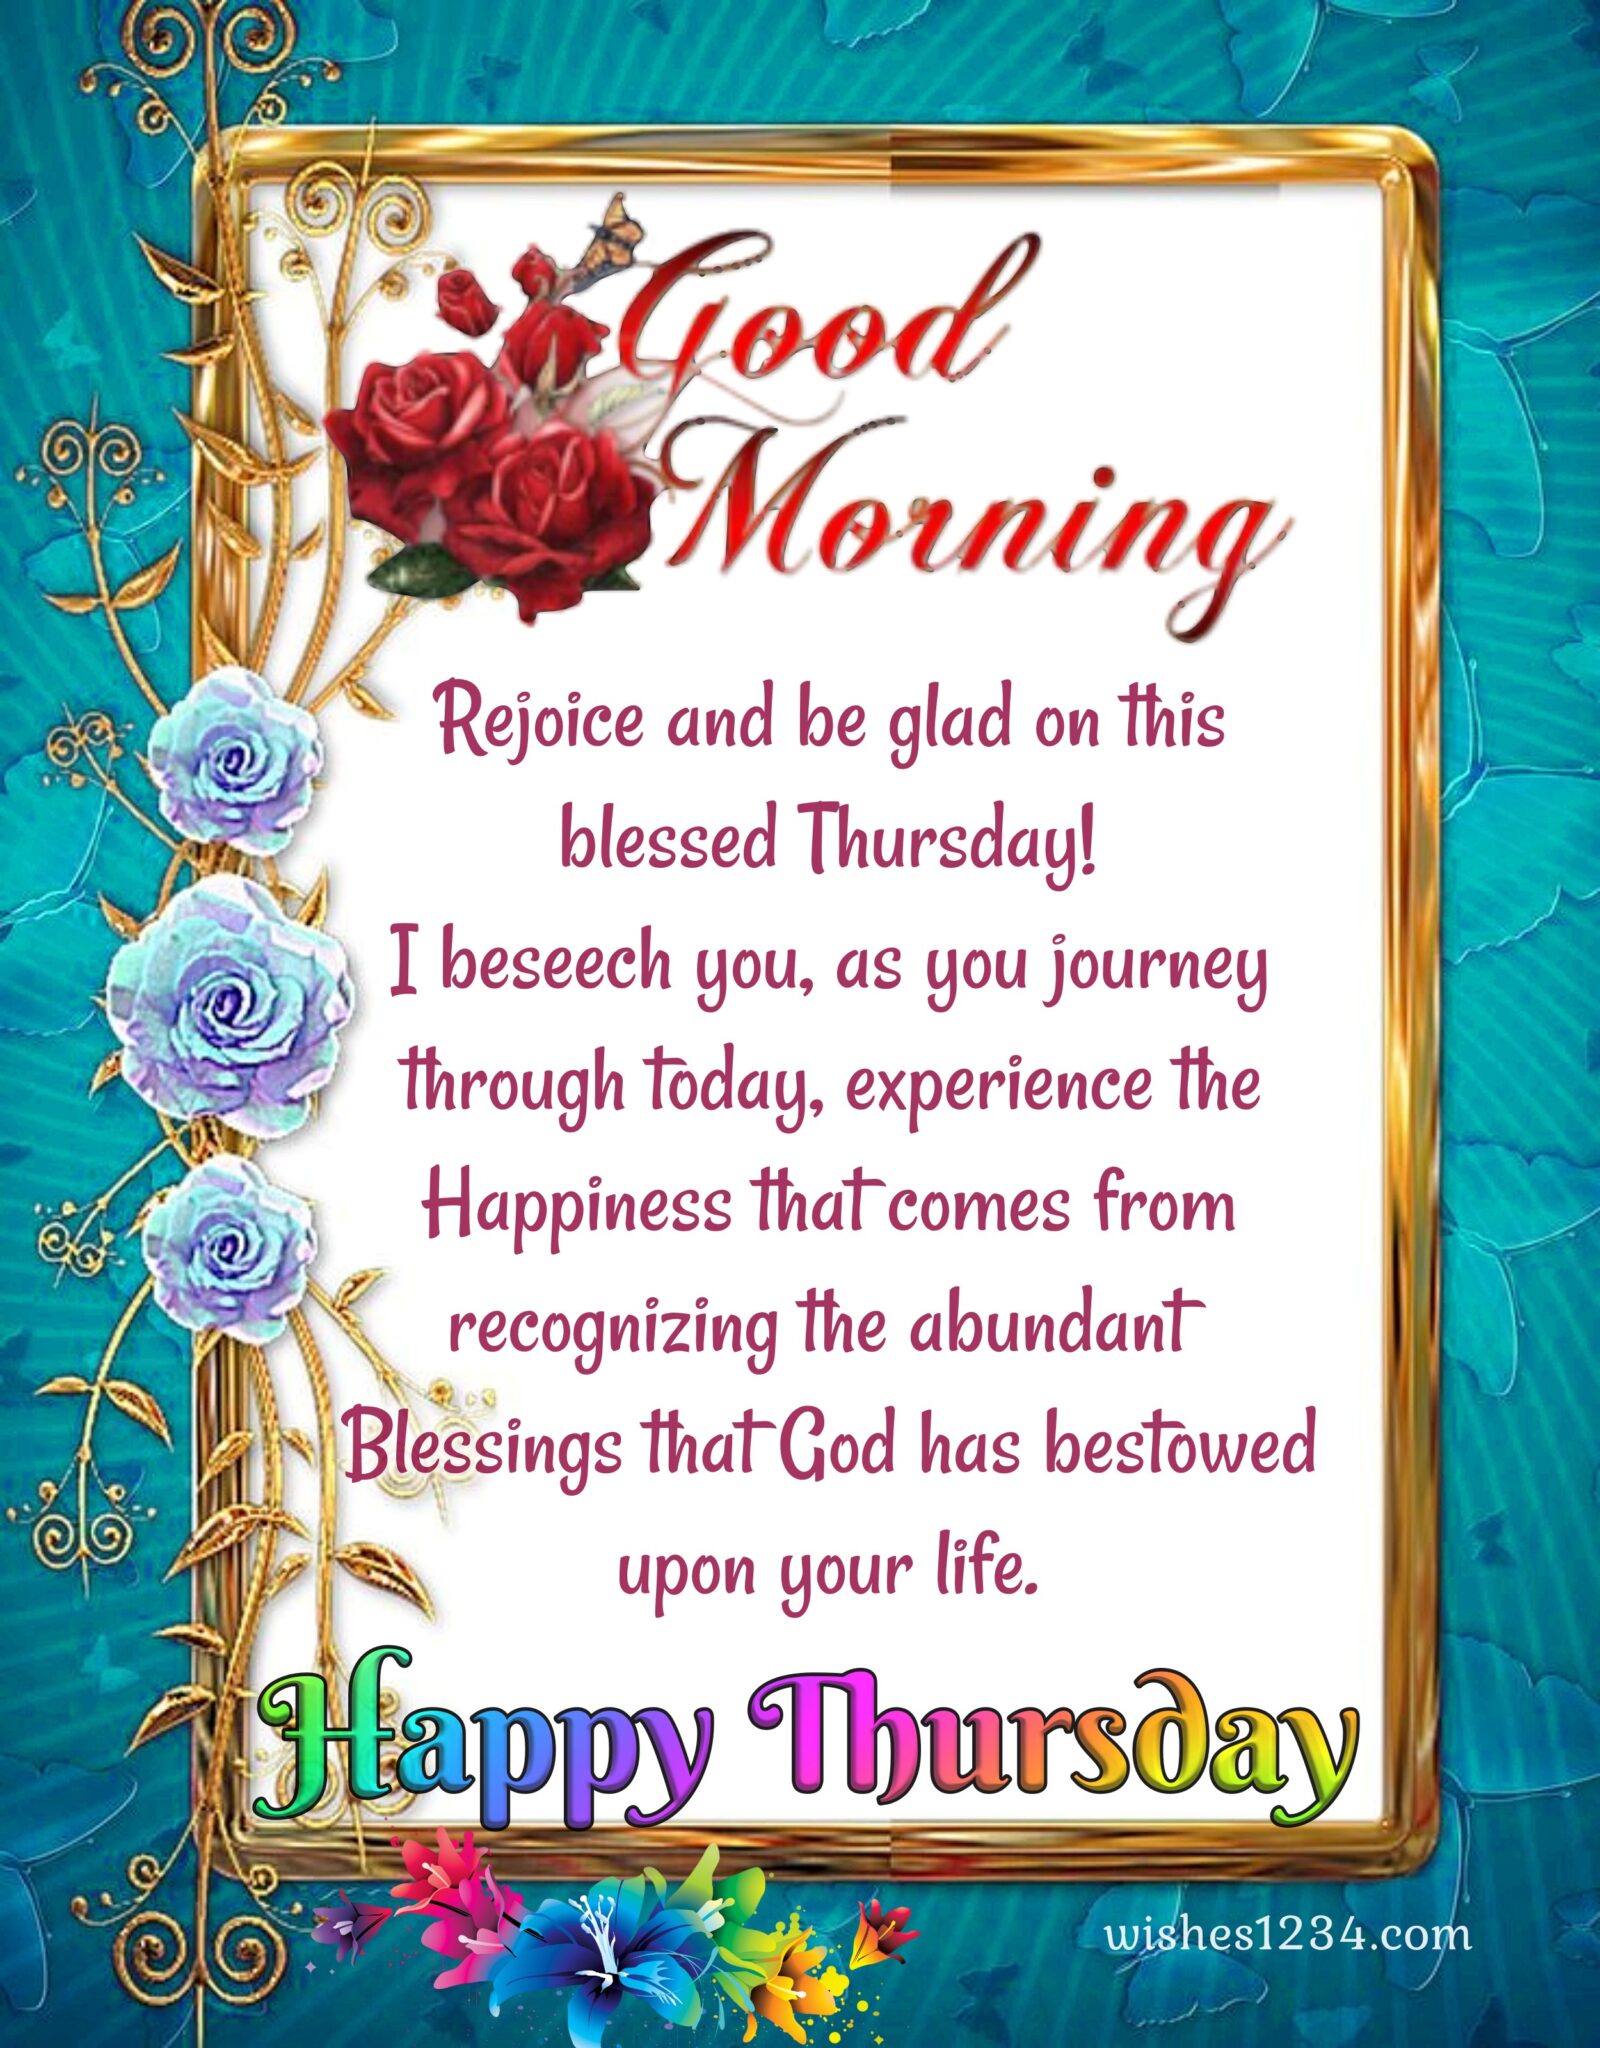 Thursday Quotes, Thursday Blessings, and Images